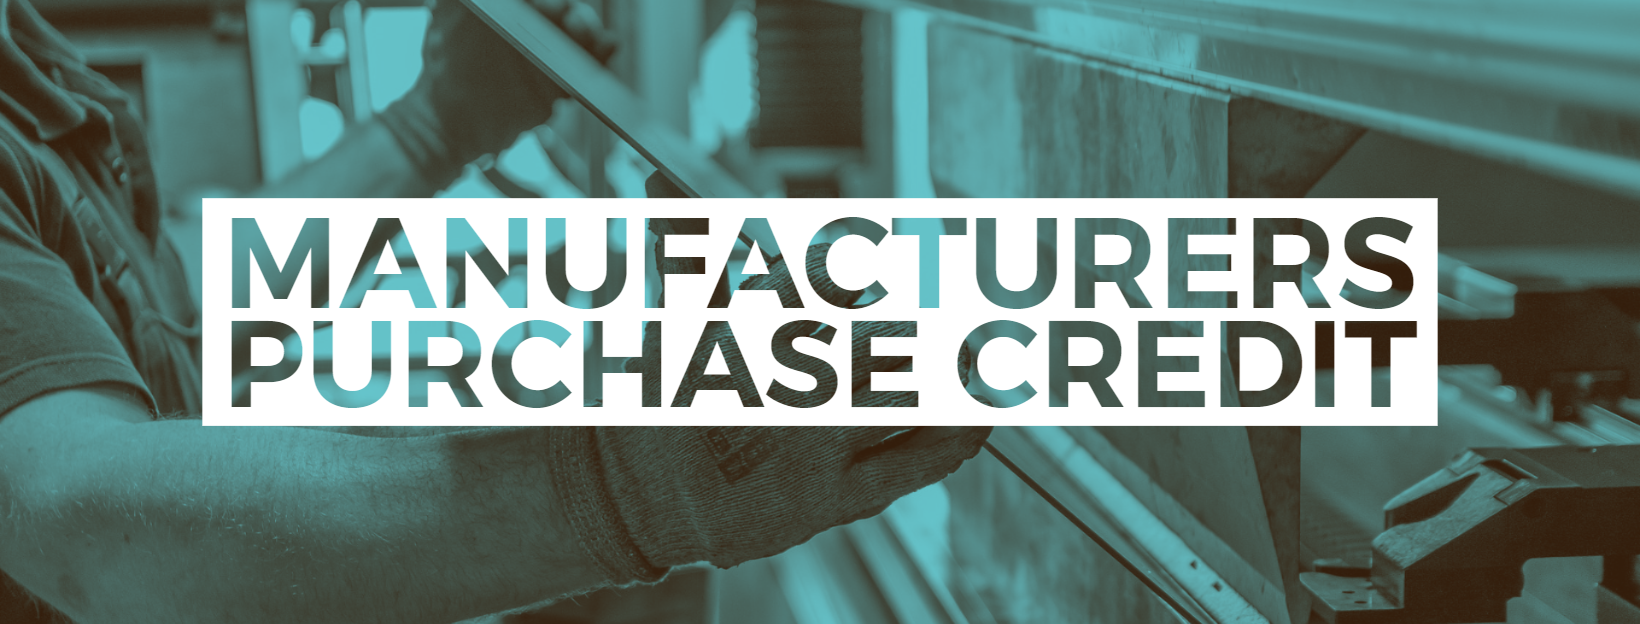 Manufacturers Purchase Credit